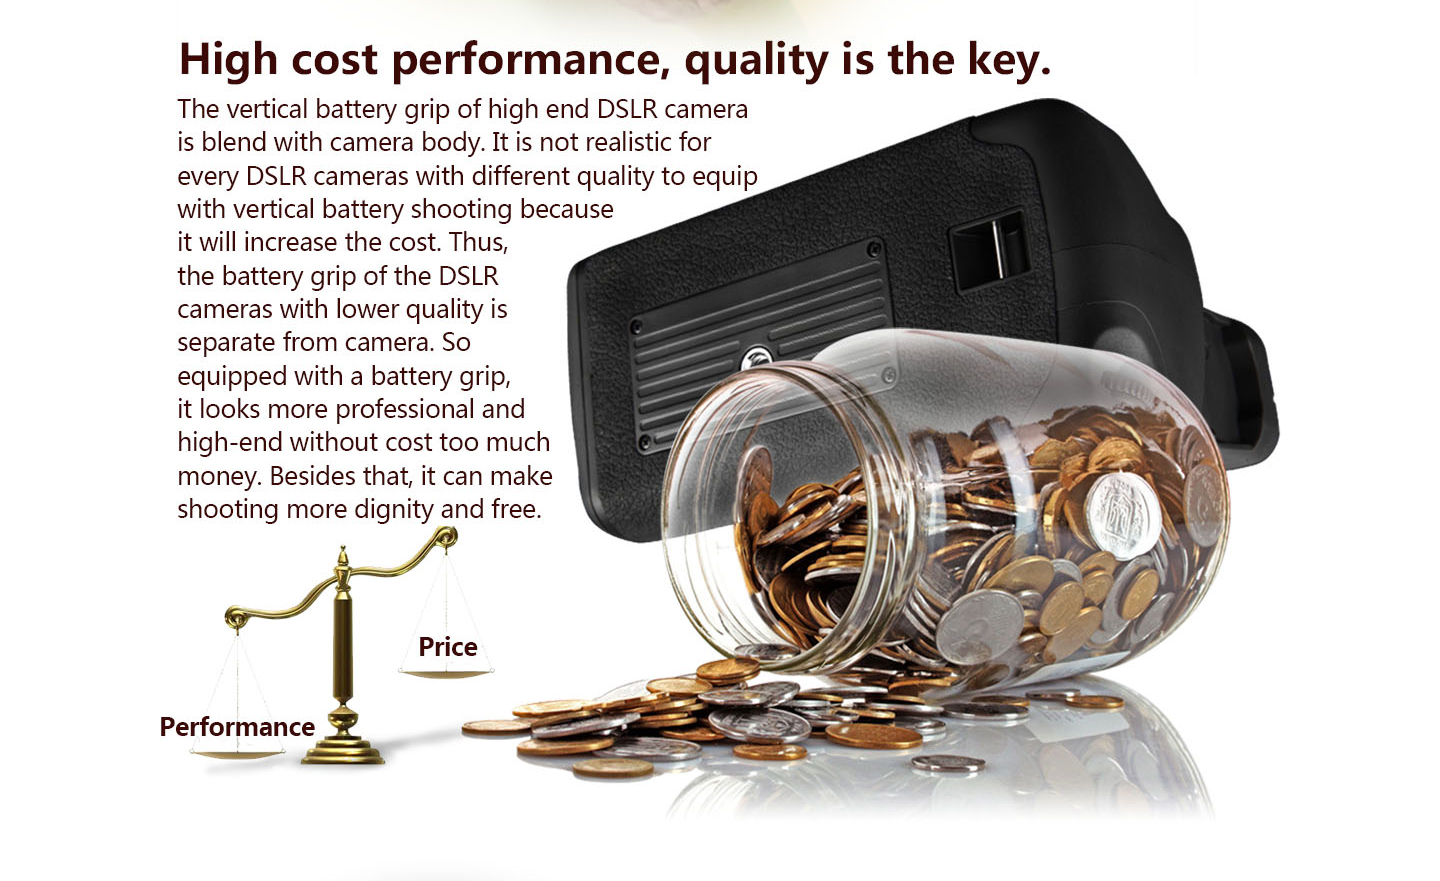 High cost performance, quality is the key